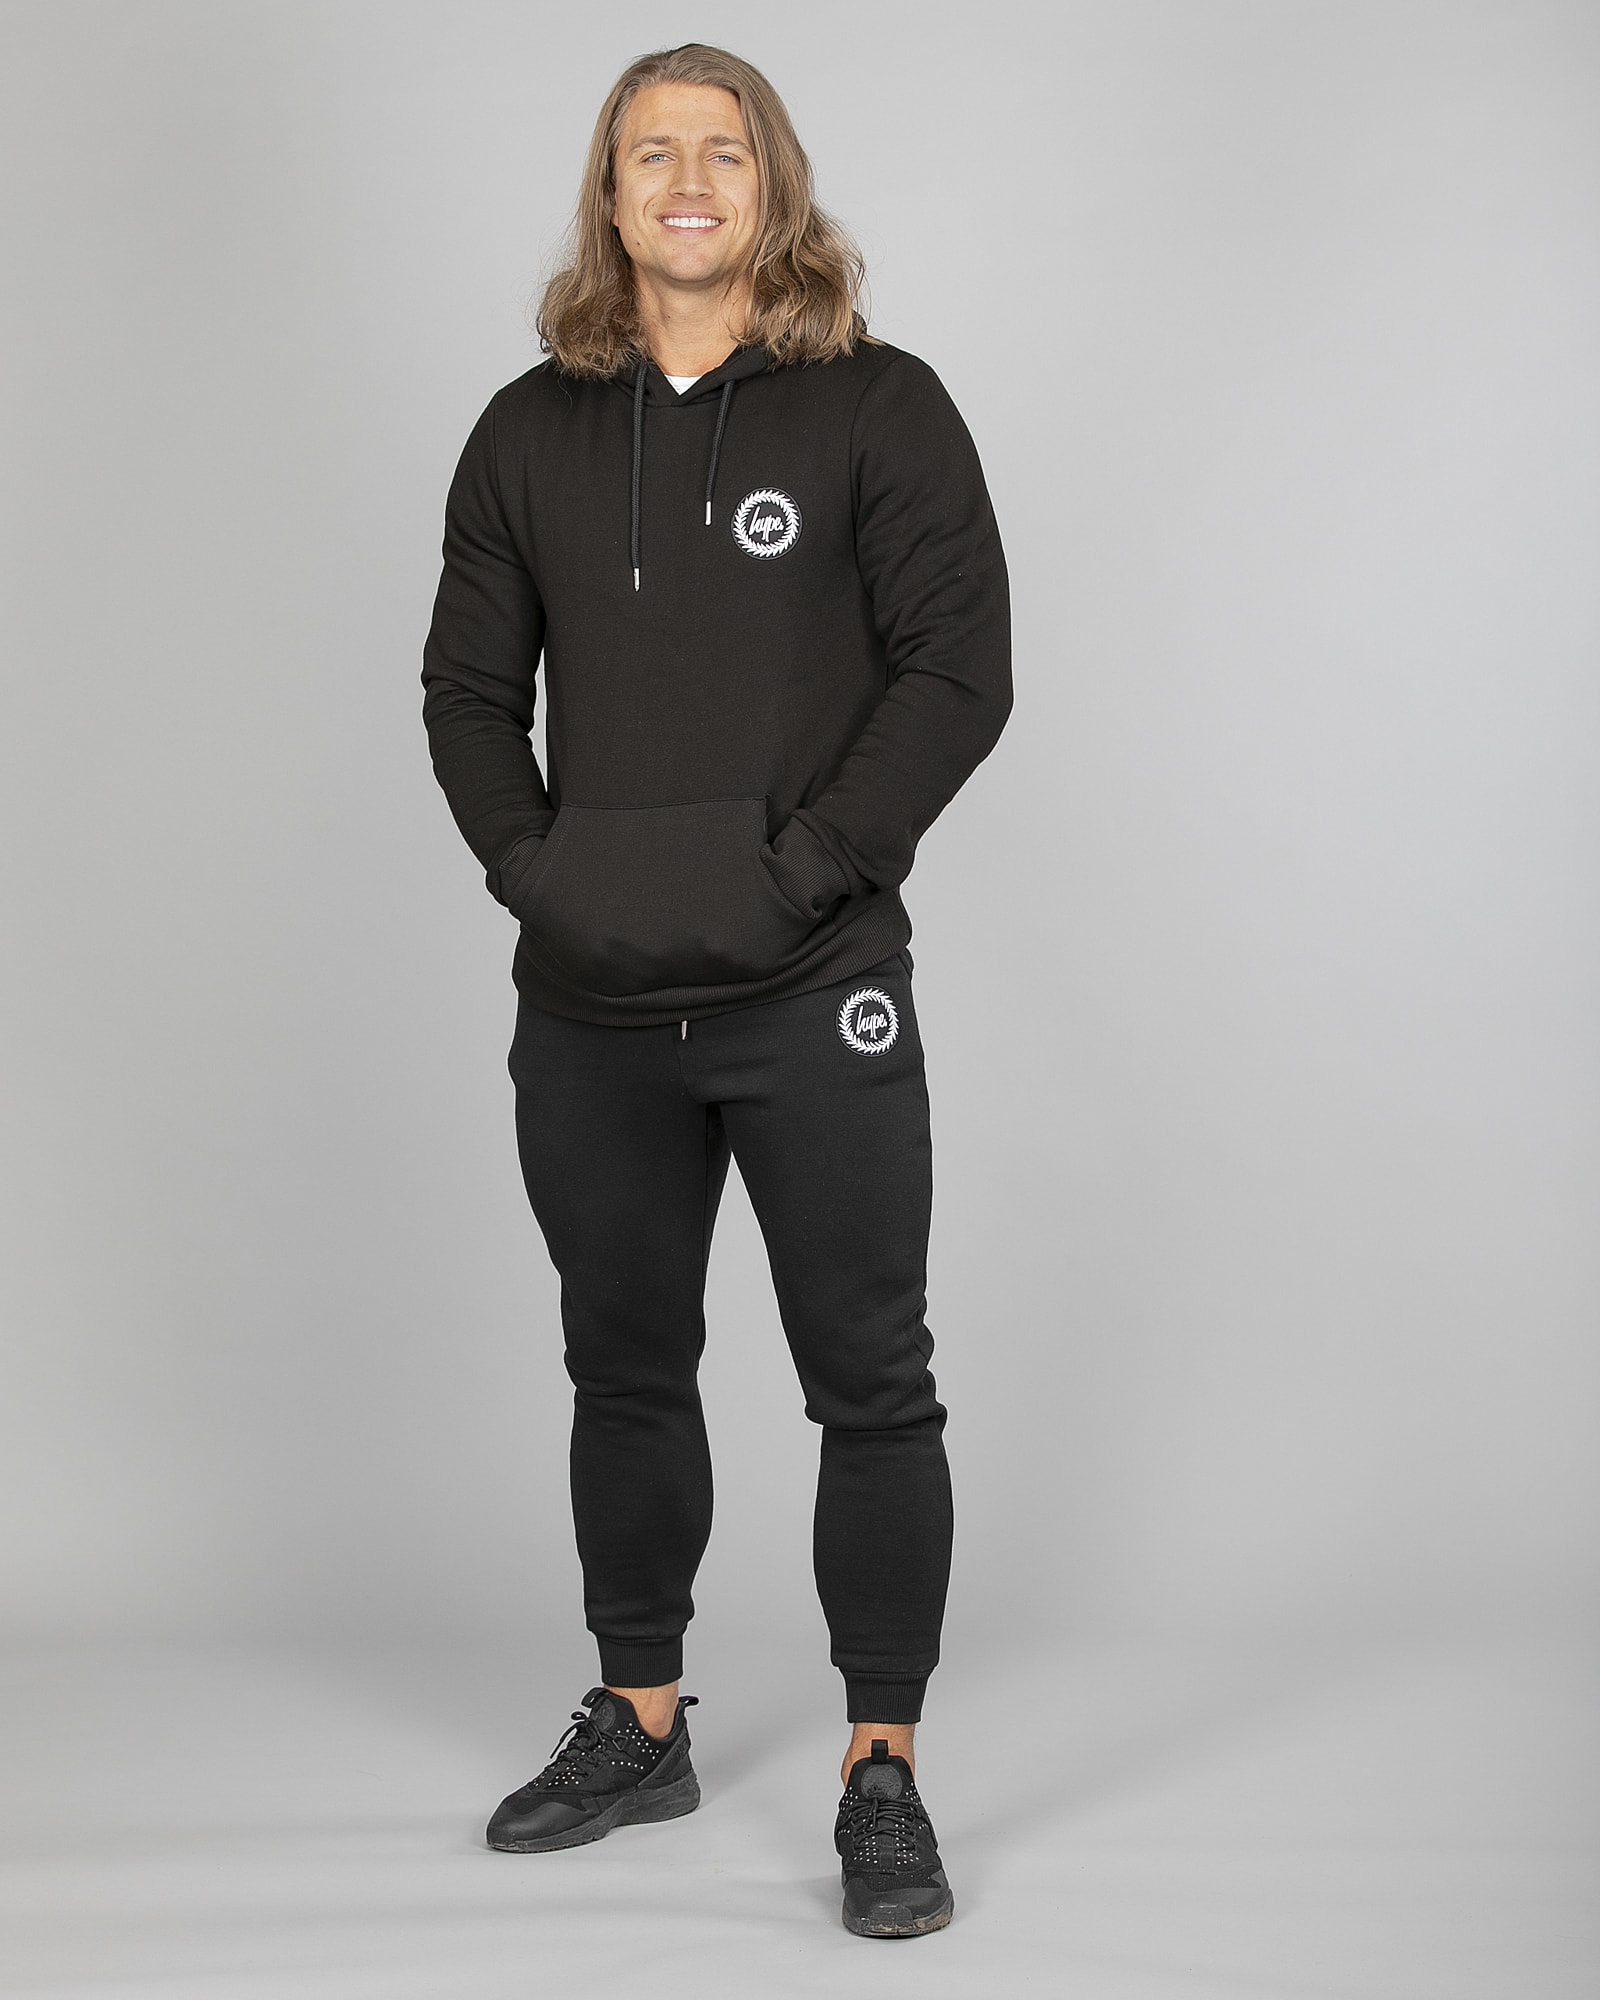 Hype Crest Pullover Hoodie Men ss18333b Black and Crest Jogger ss18335b Black